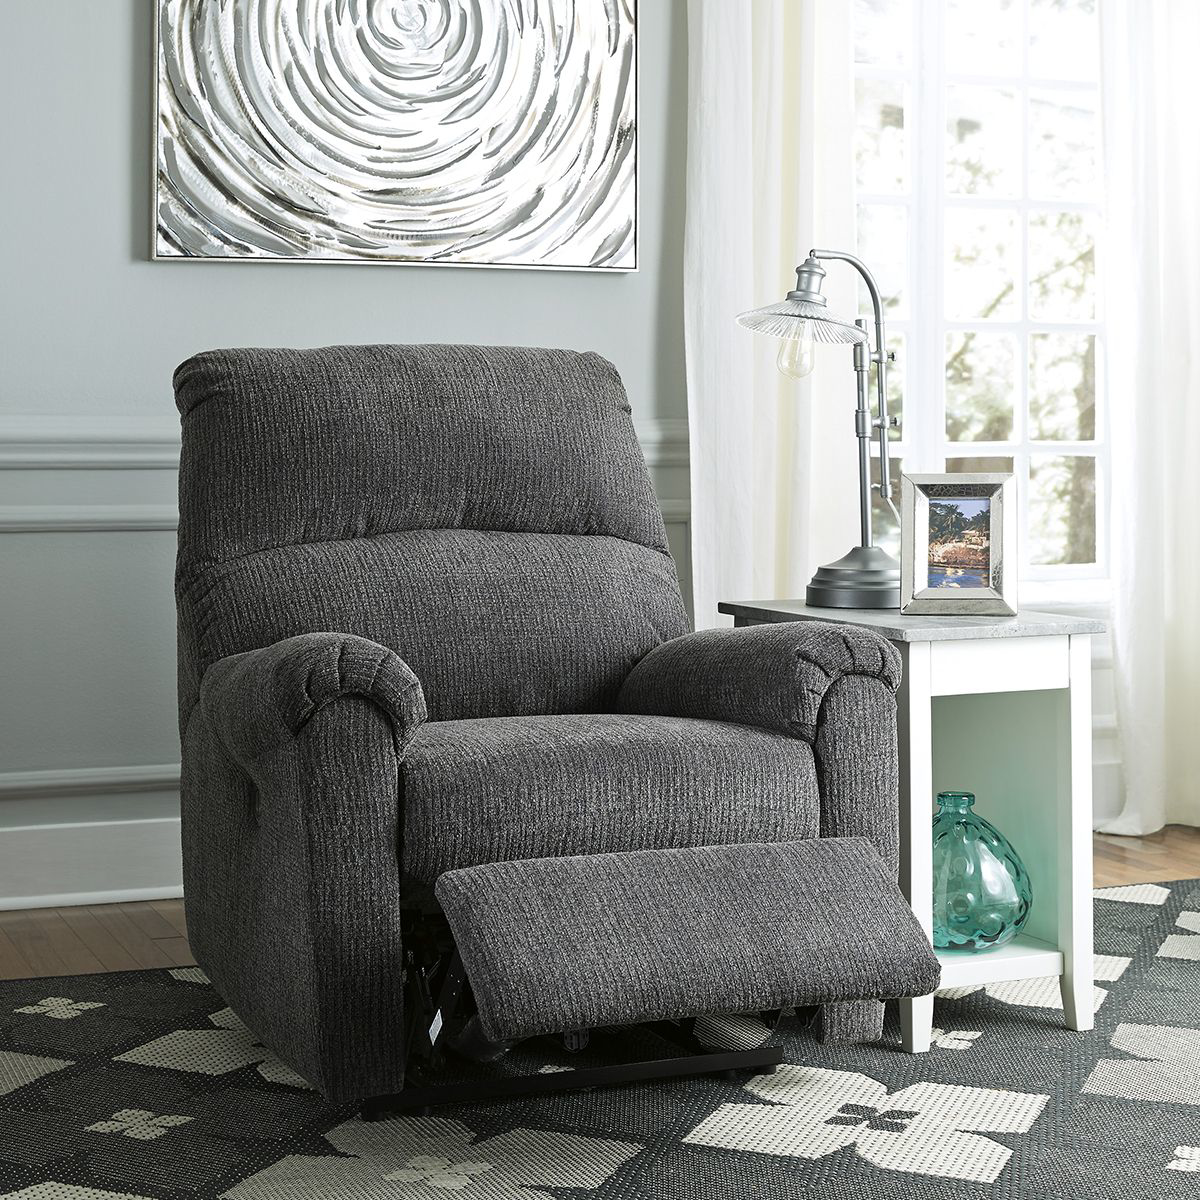 Picture of TERRANCE GREY PWR RECLINER